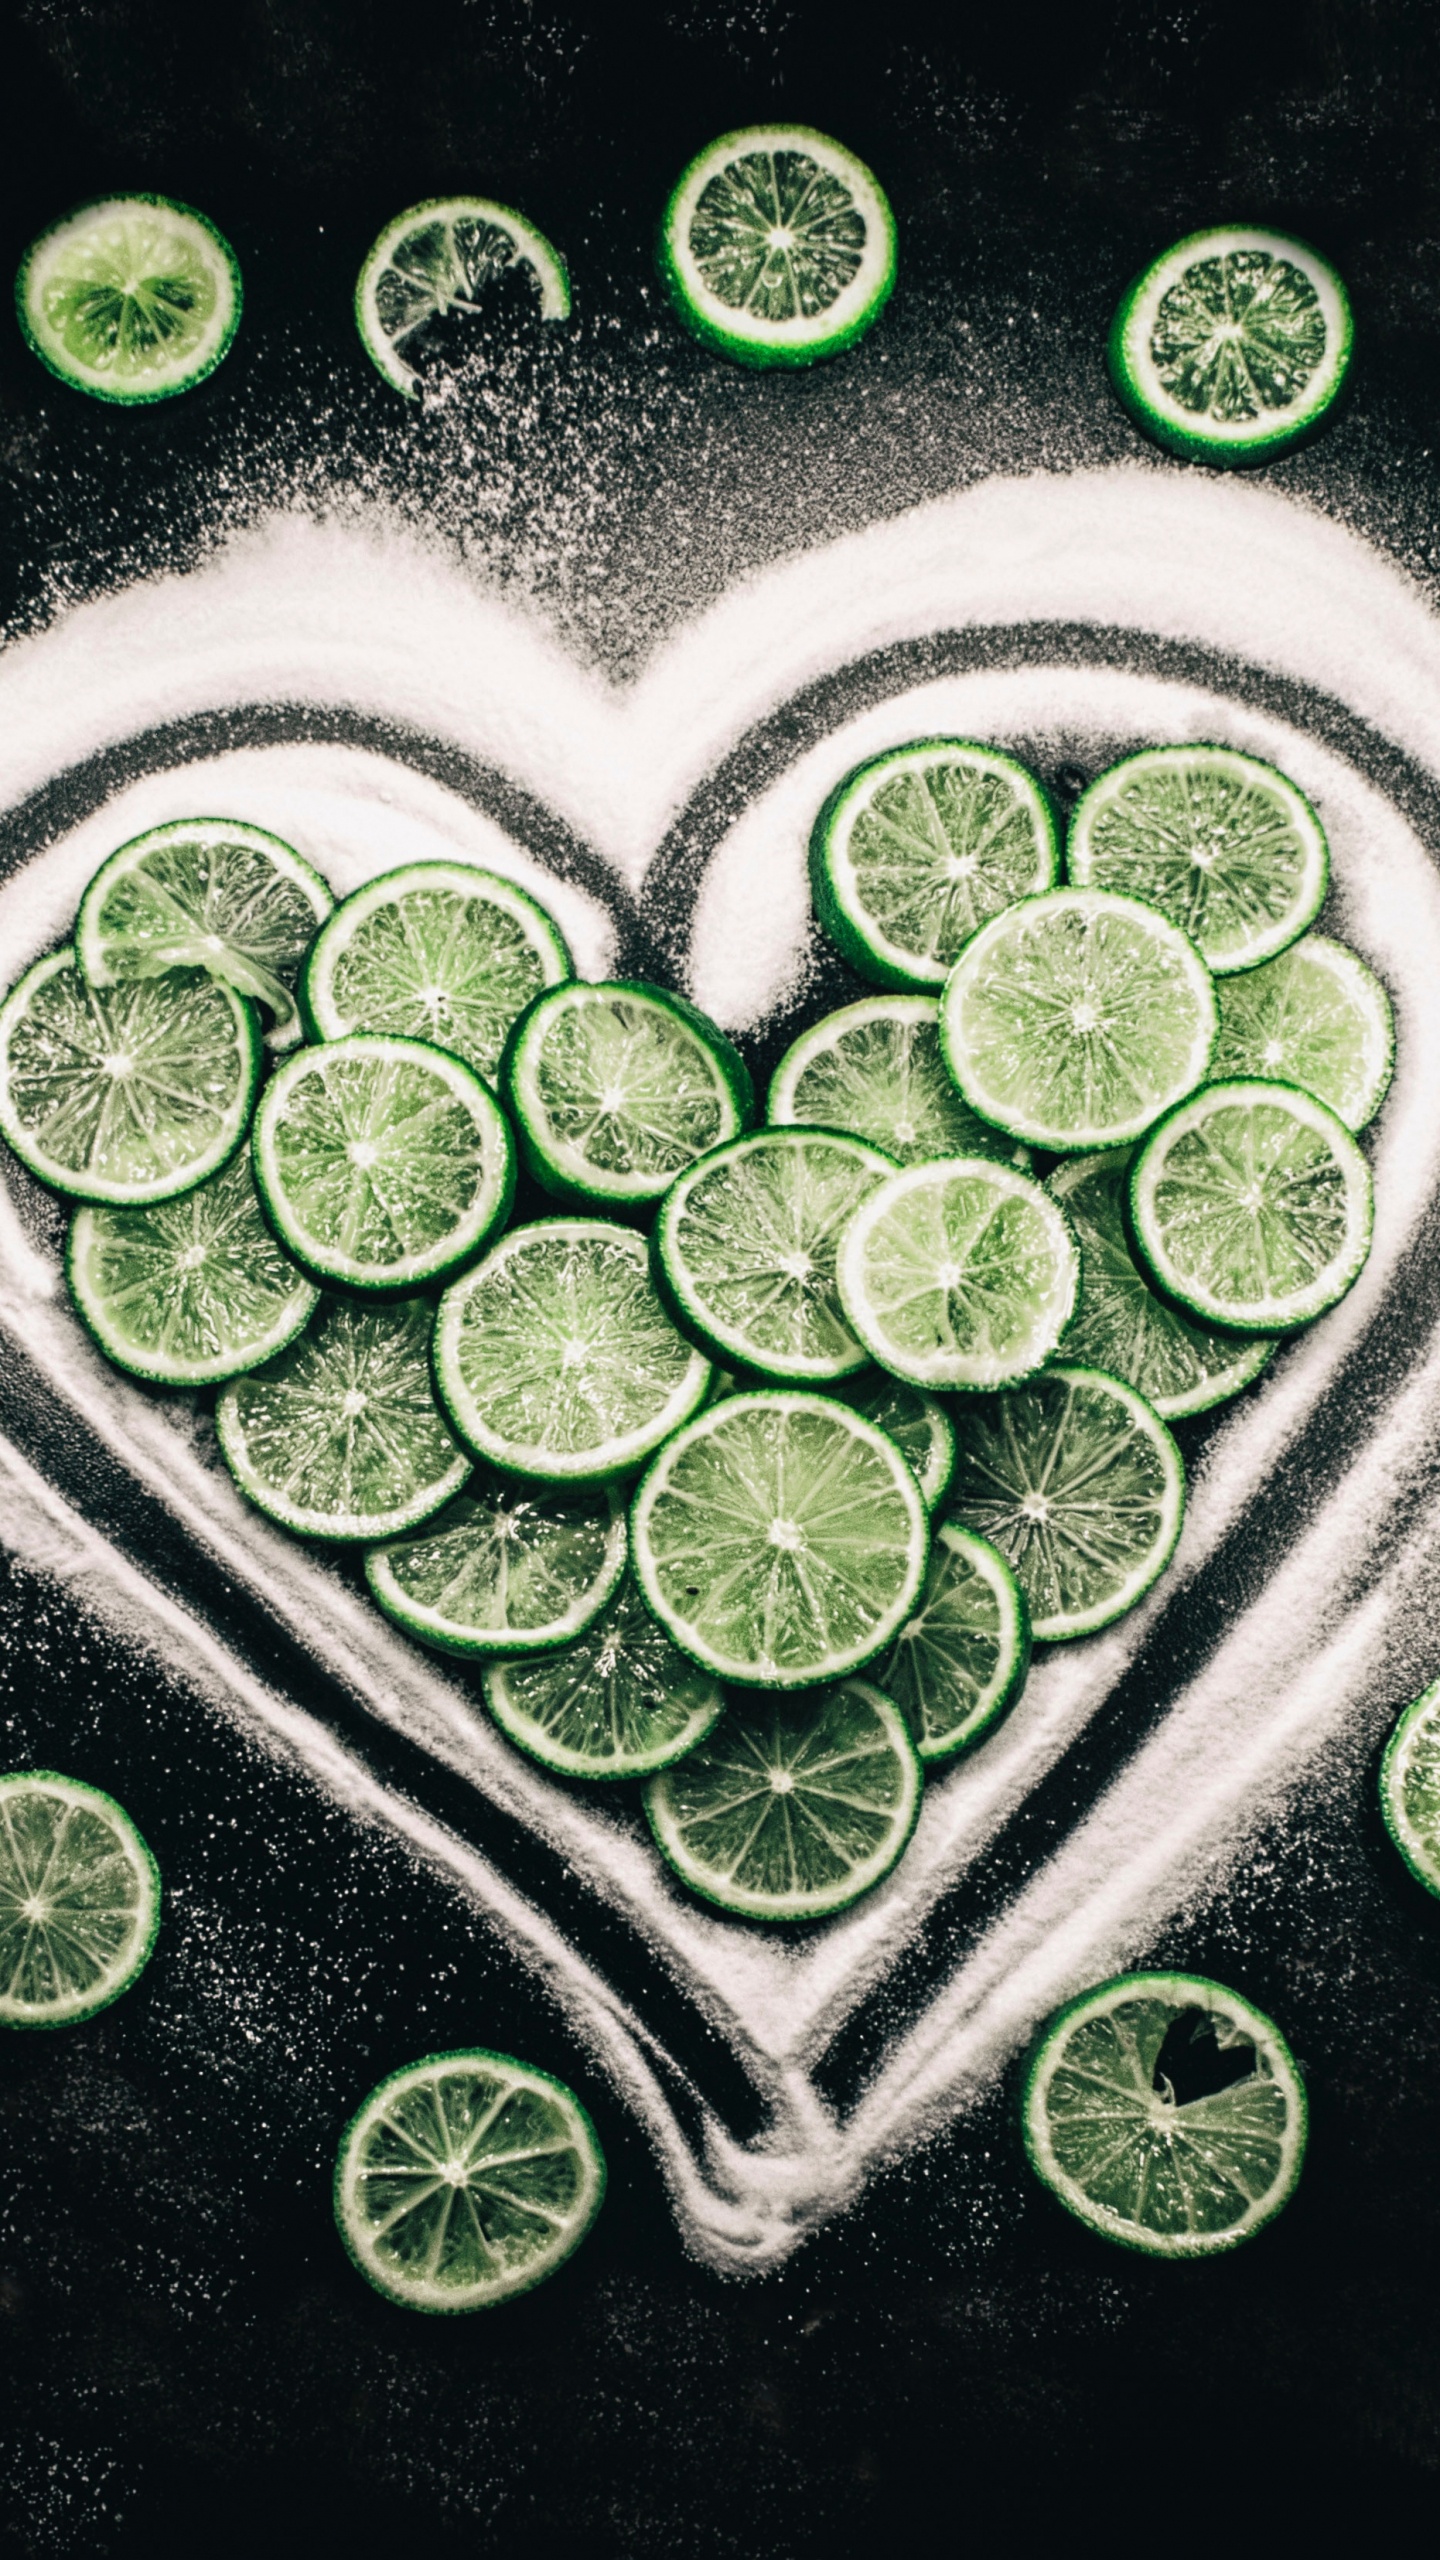 Silver Heart Shaped With Green Gemstone. Wallpaper in 1440x2560 Resolution